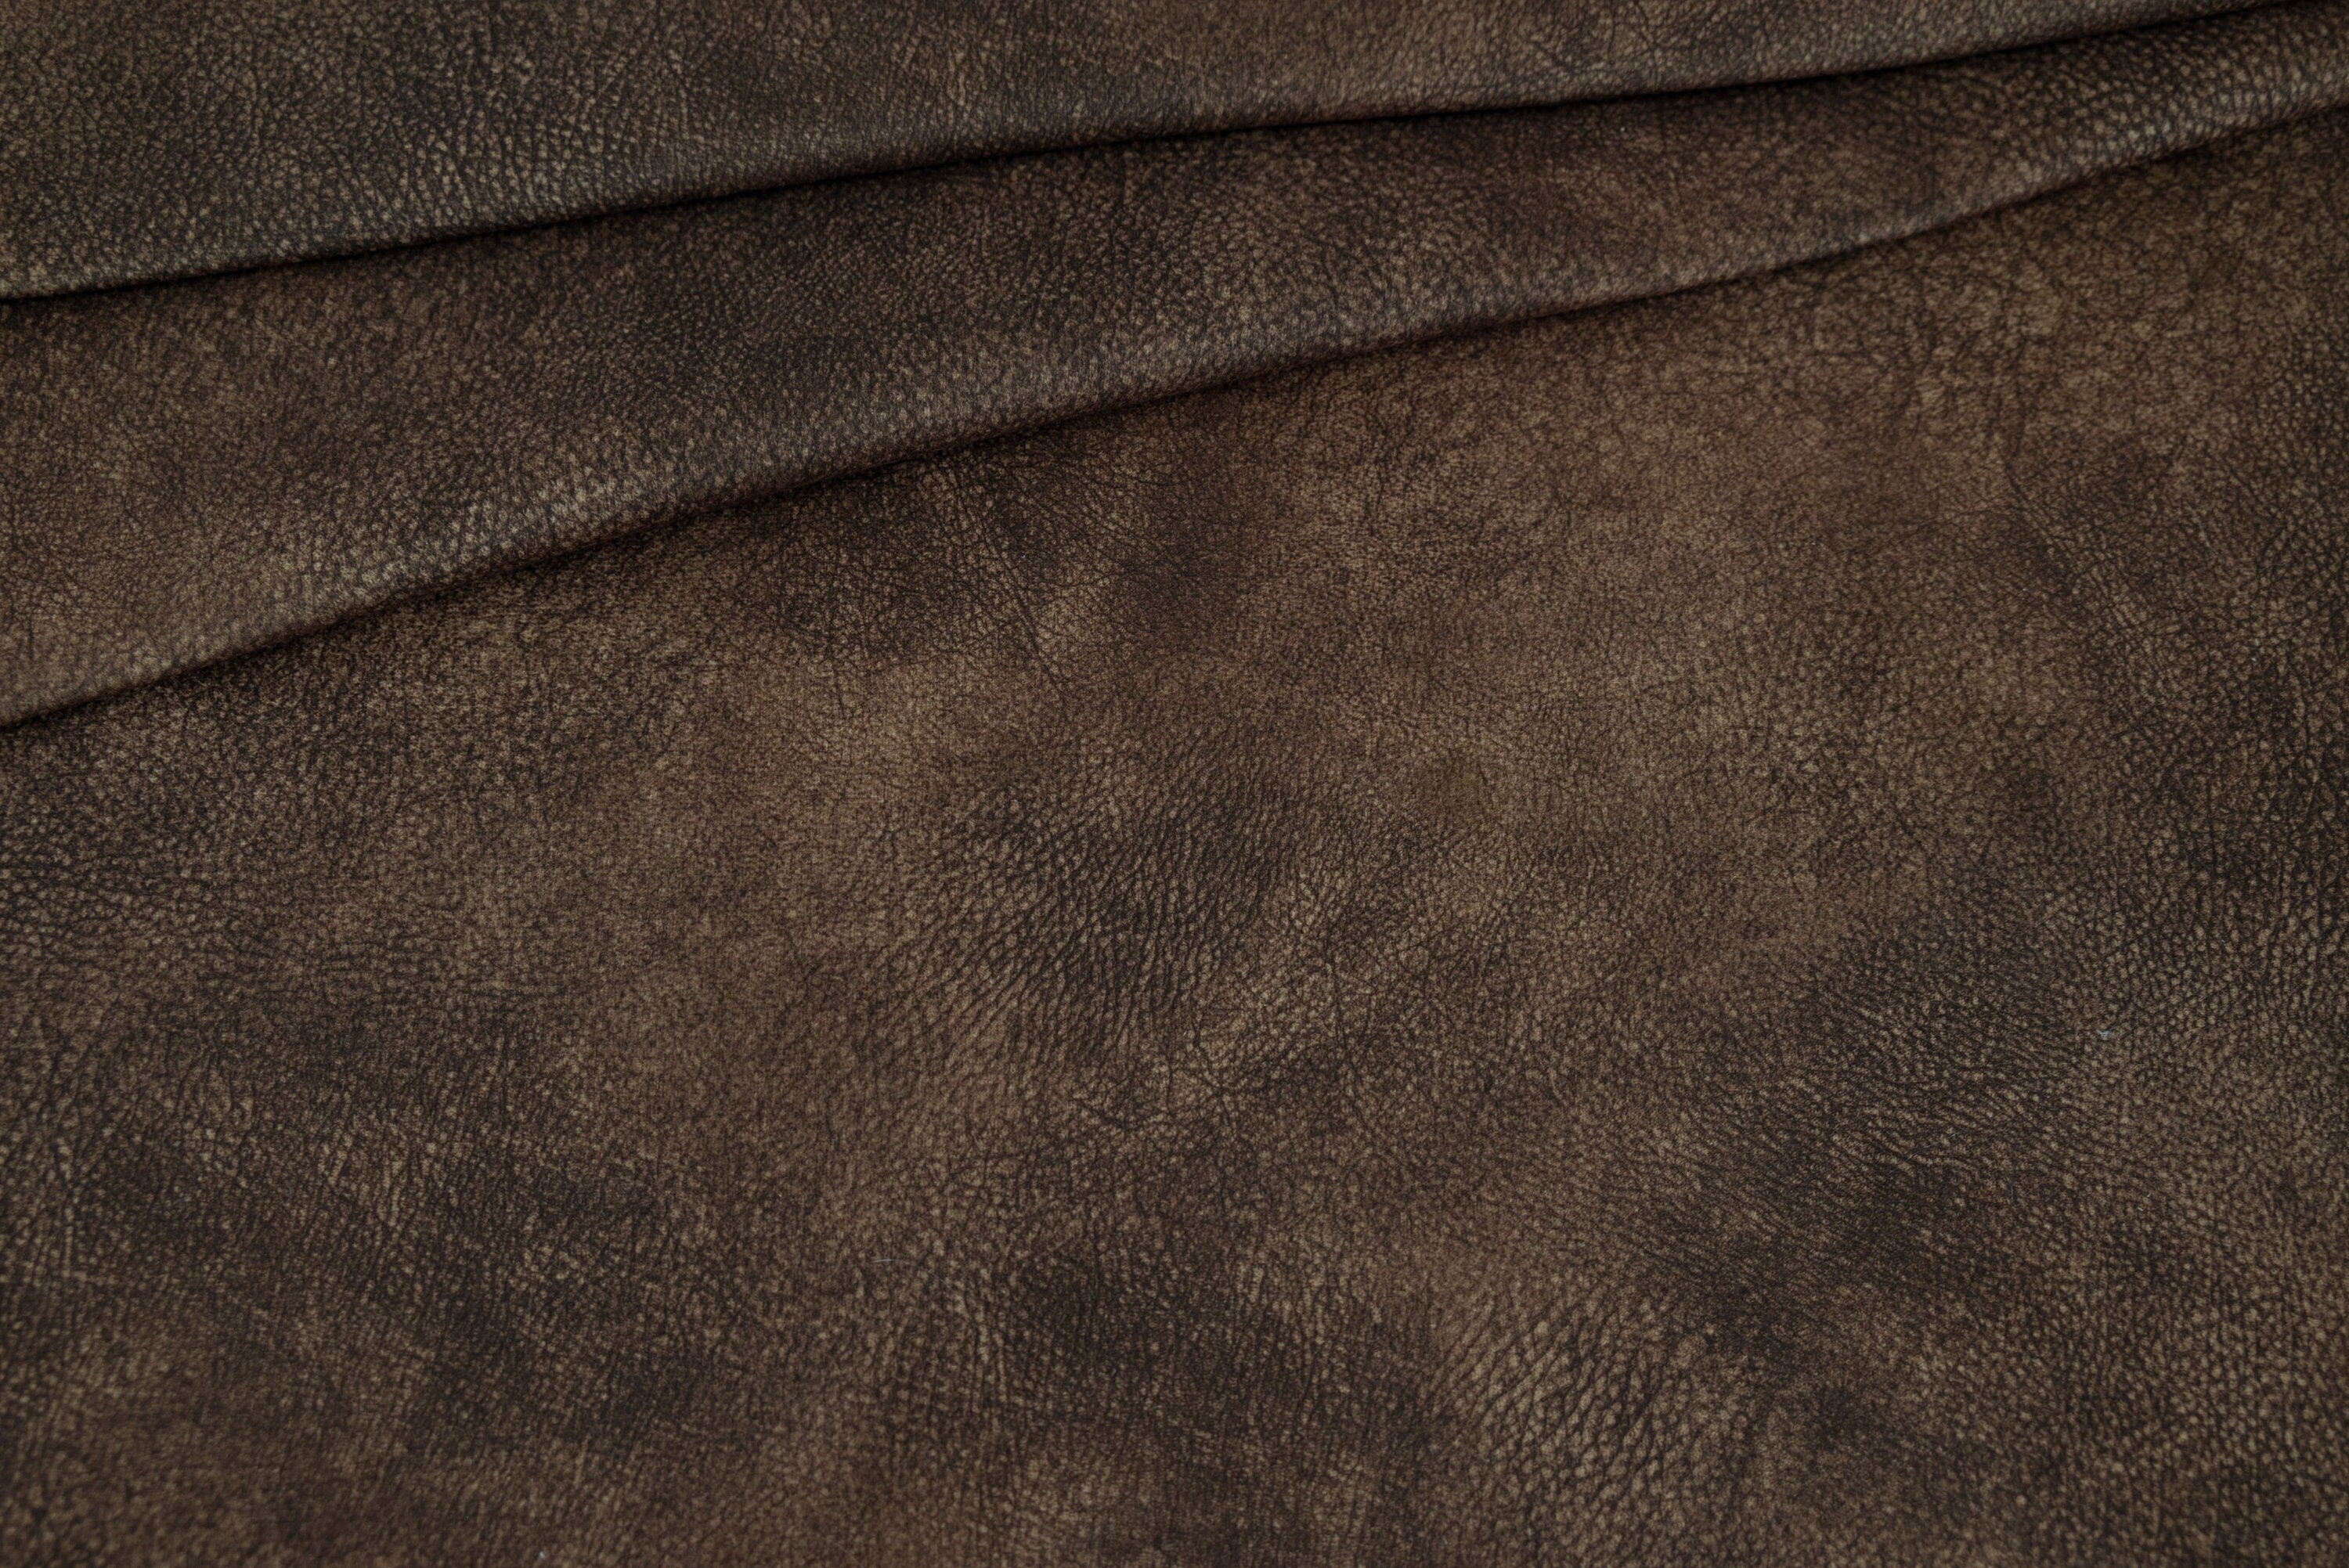 Plain Soft Leather Look Faux Fake Leather Fabric 55/142cm 611gsm